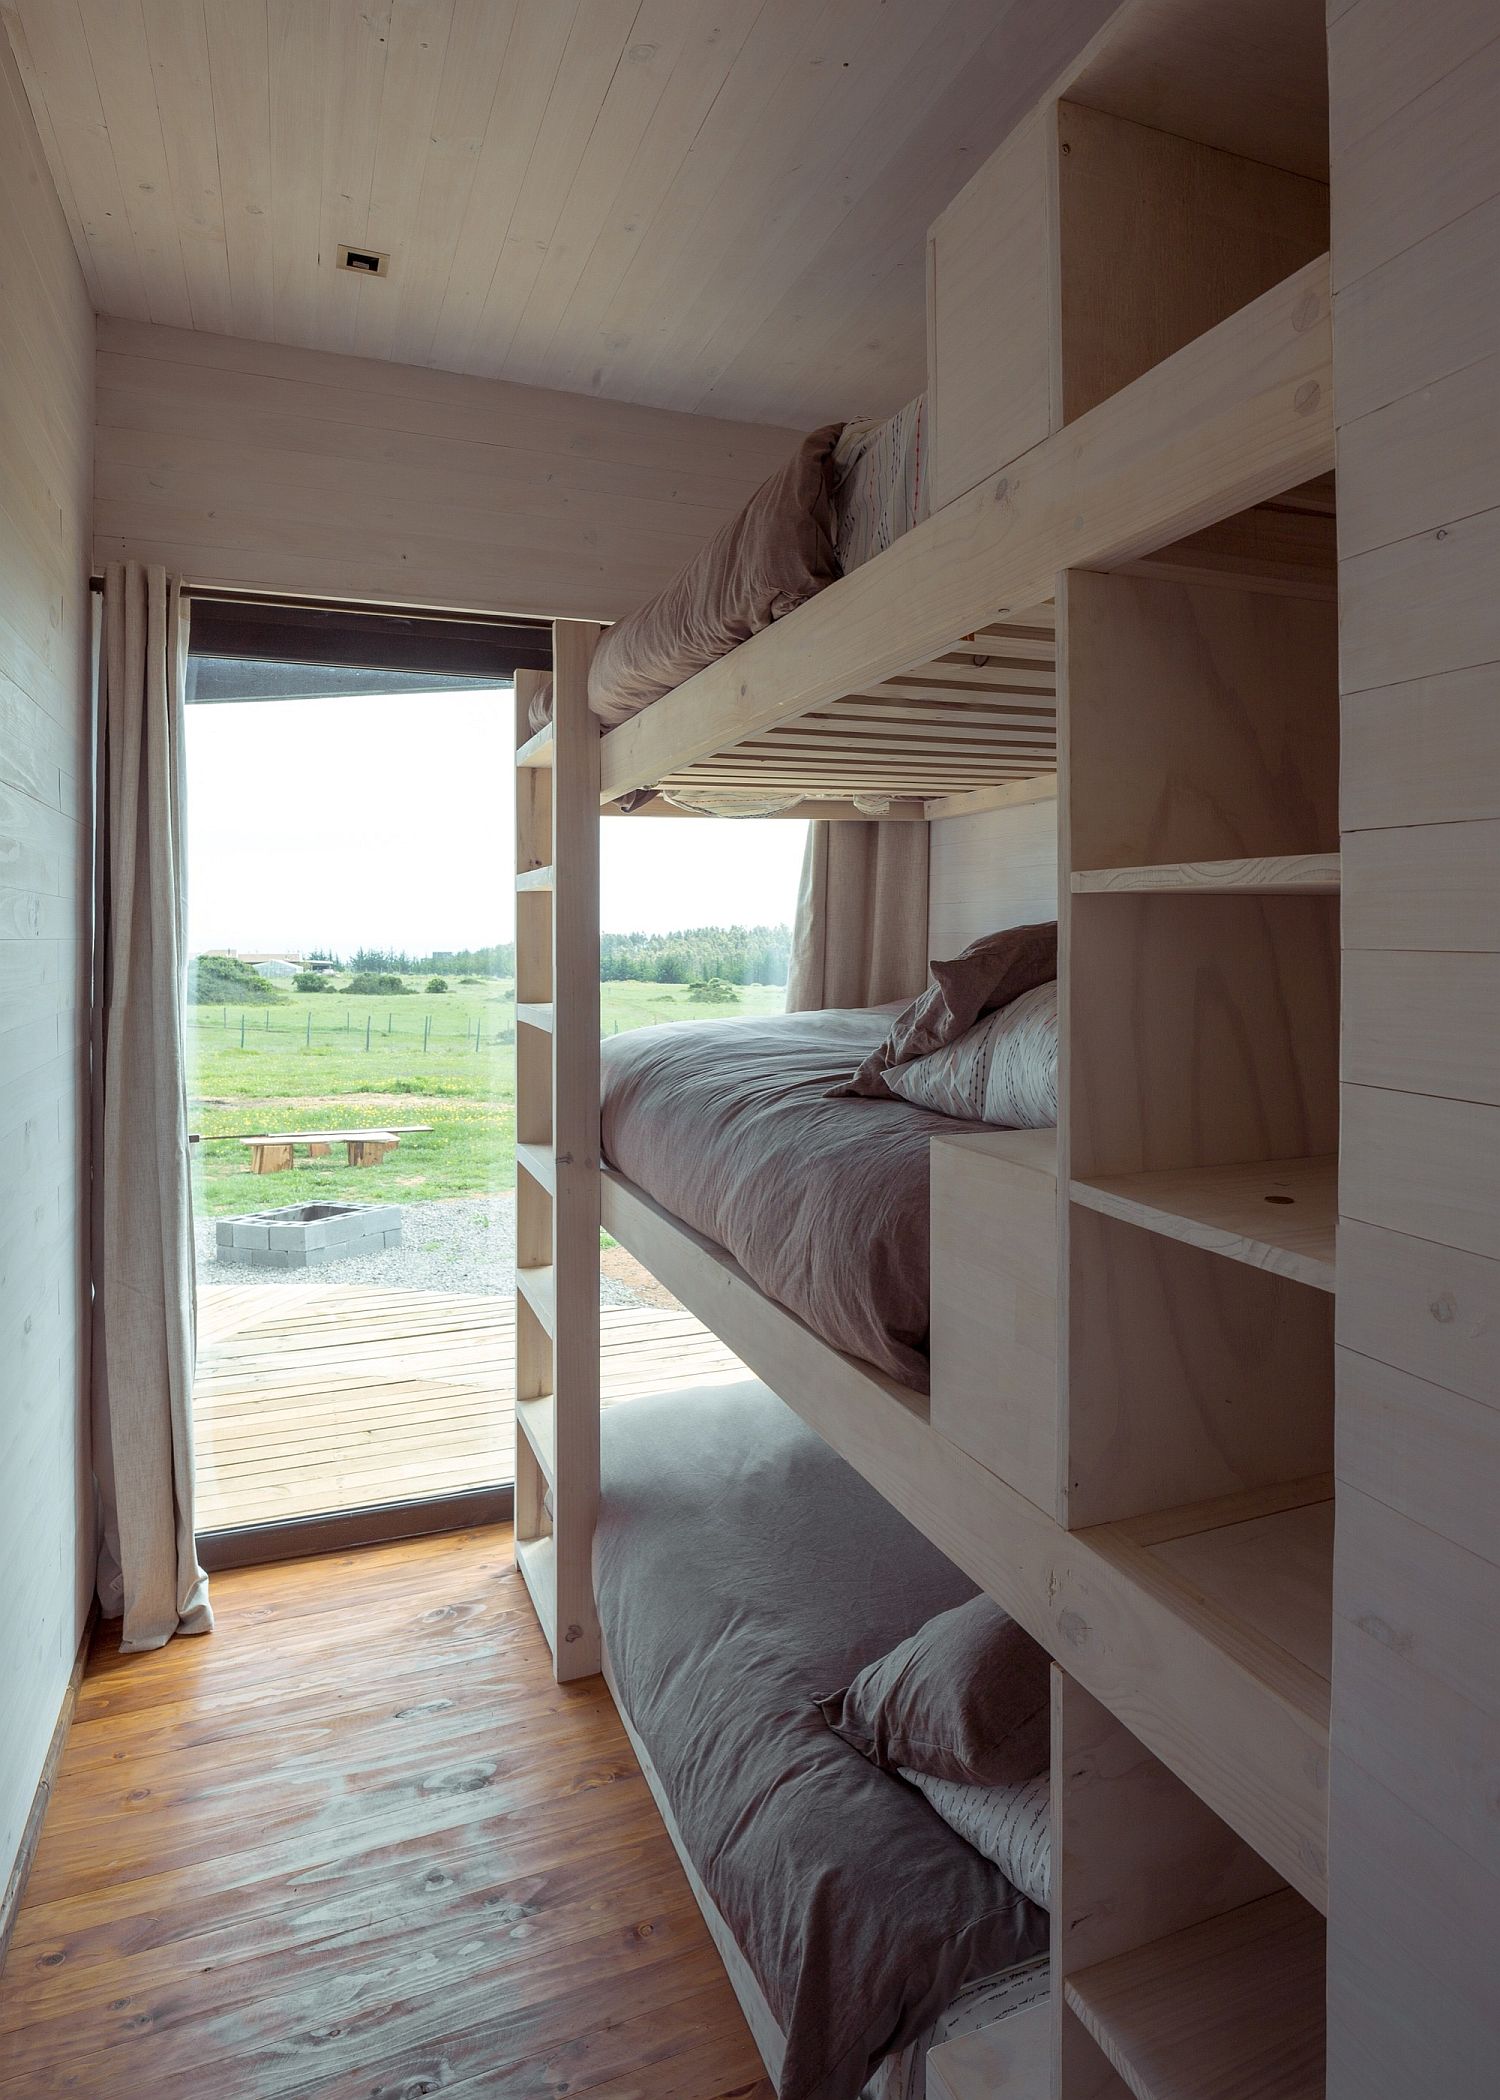 Bunk-beds-of-the-kids-bedroom-with-a-view-of-the-distant-ocean